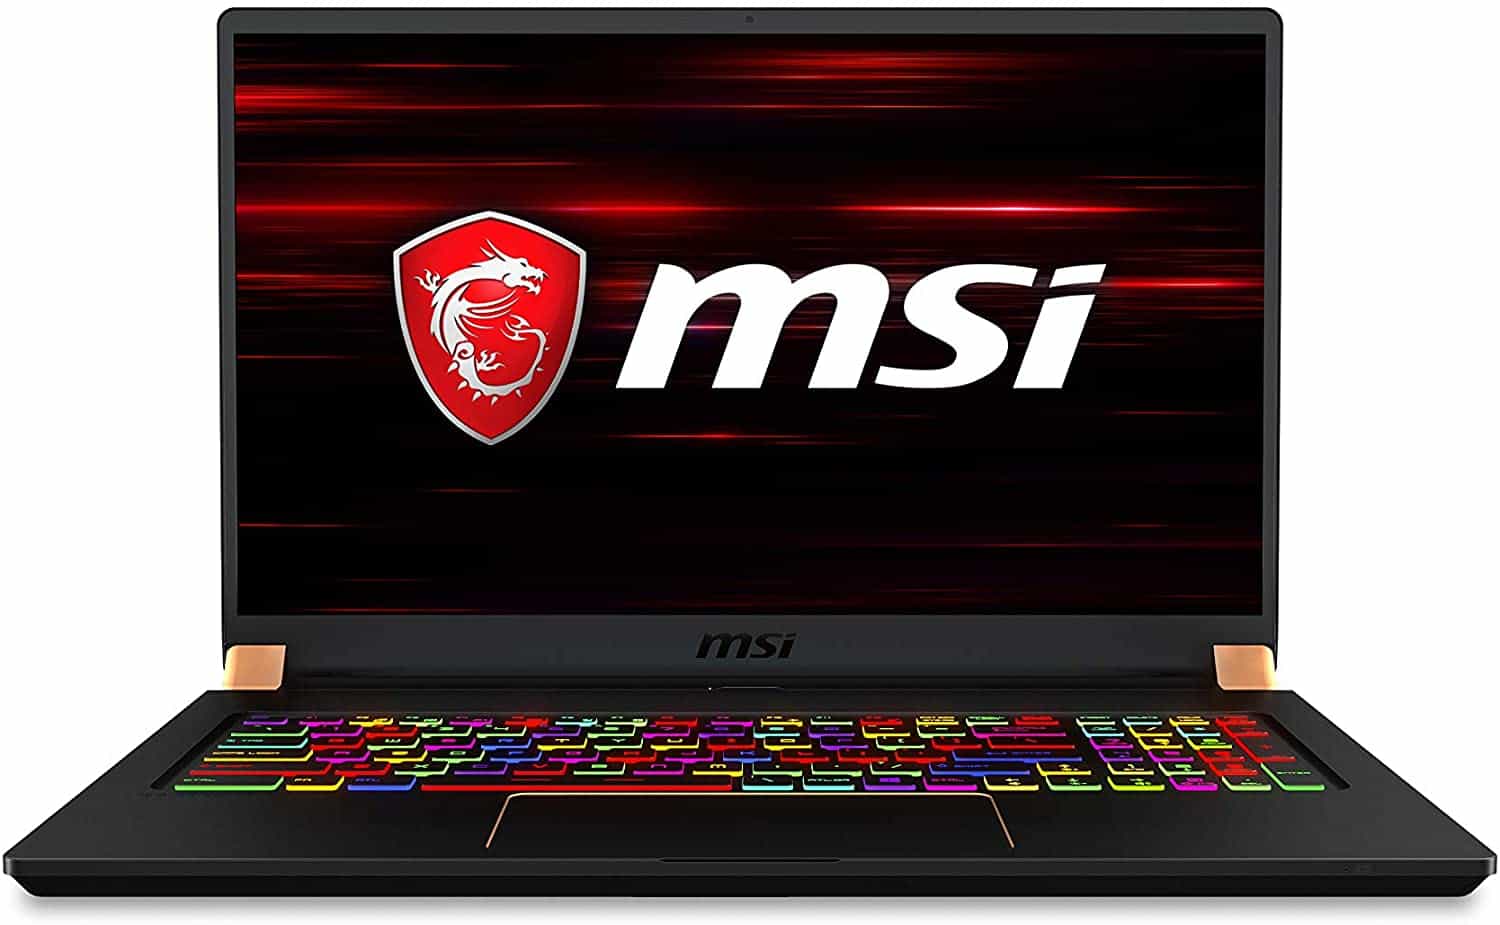 Limited Time Deal: MSI GS75 Stealth Gaming Laptop heavily discounted